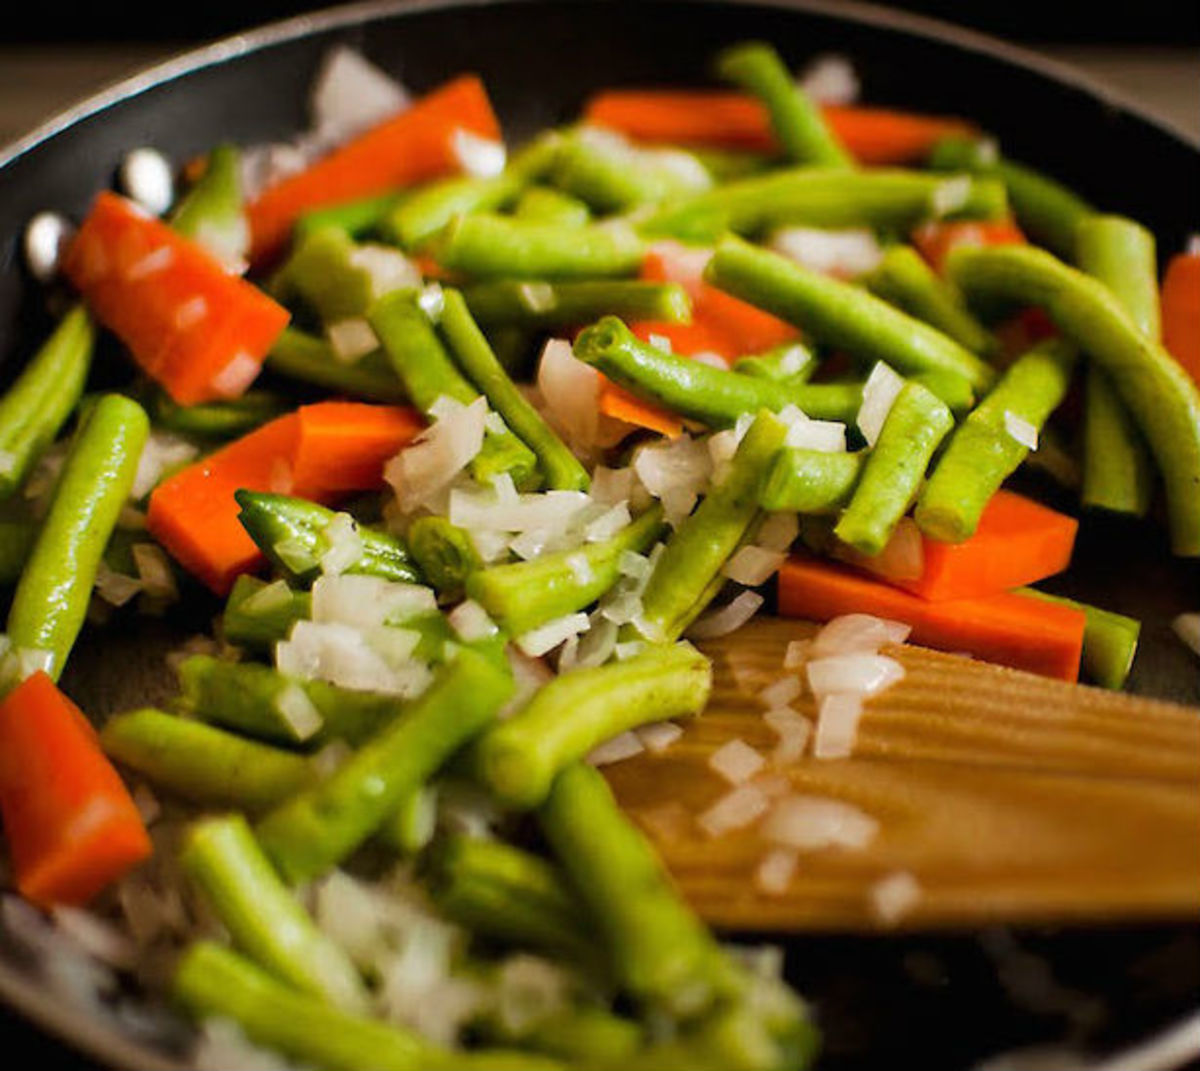 Sauteing vegetables